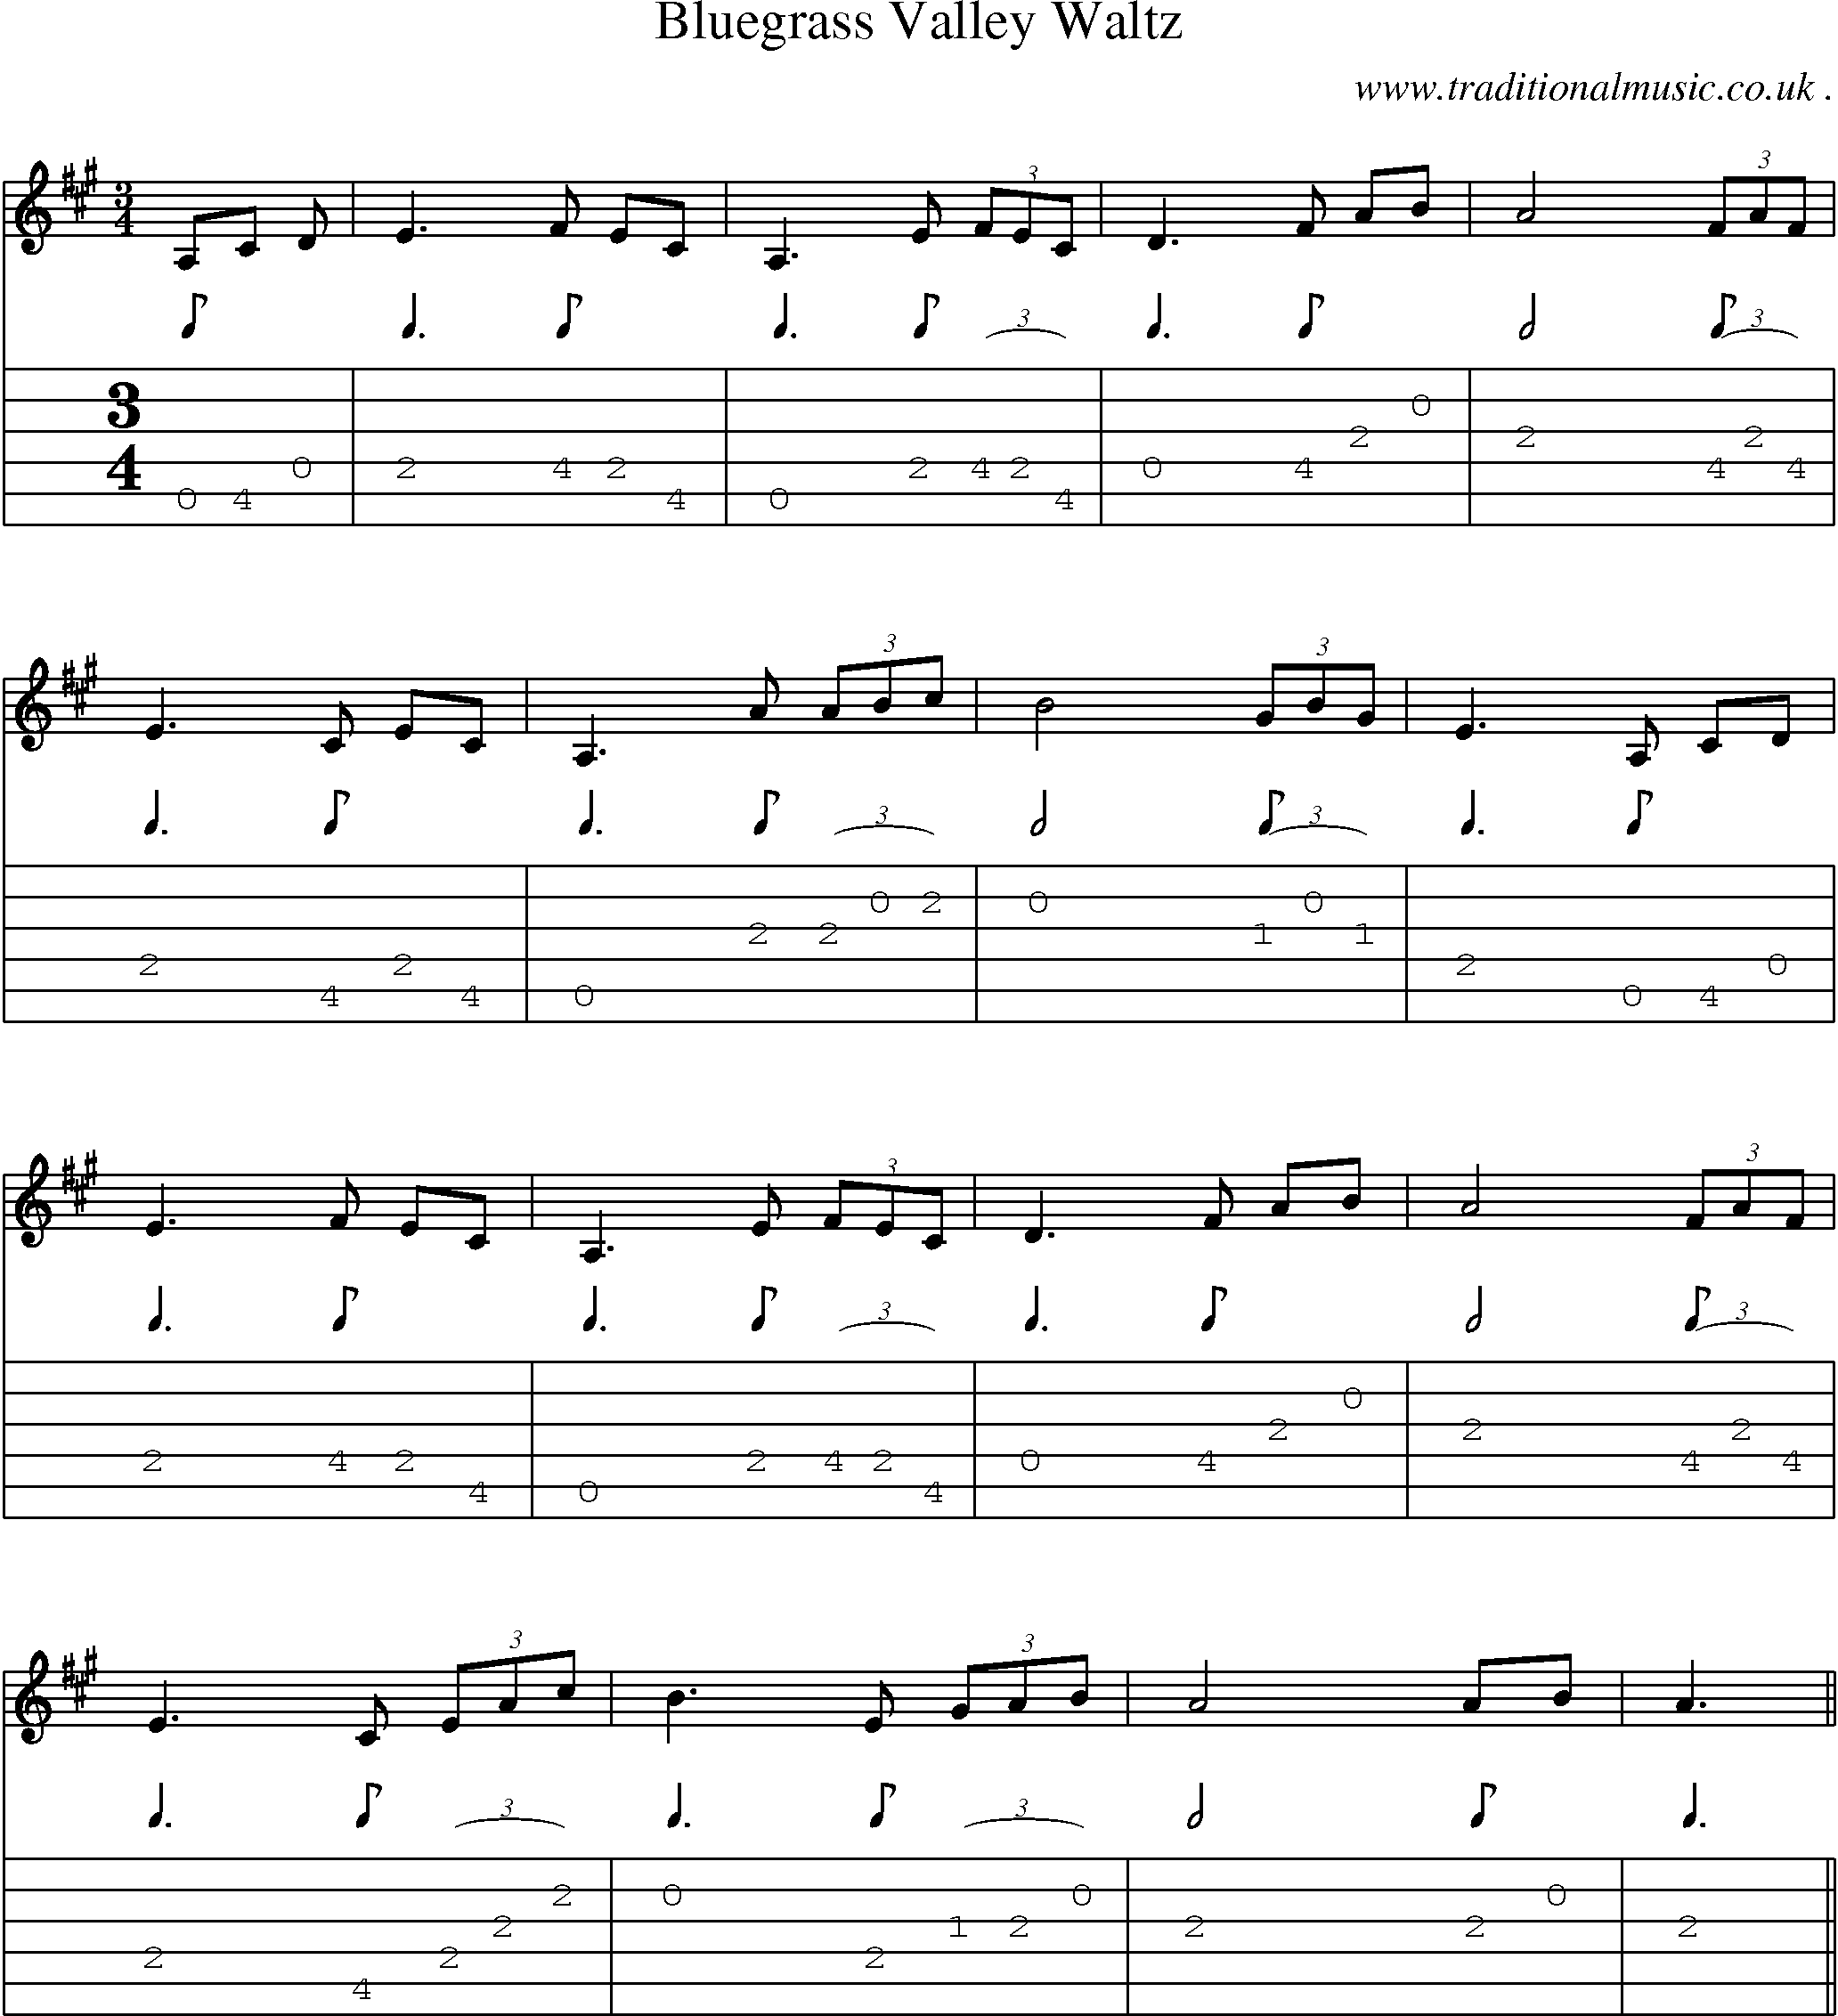 Music Score and Guitar Tabs for Bluegrass Valley Waltz